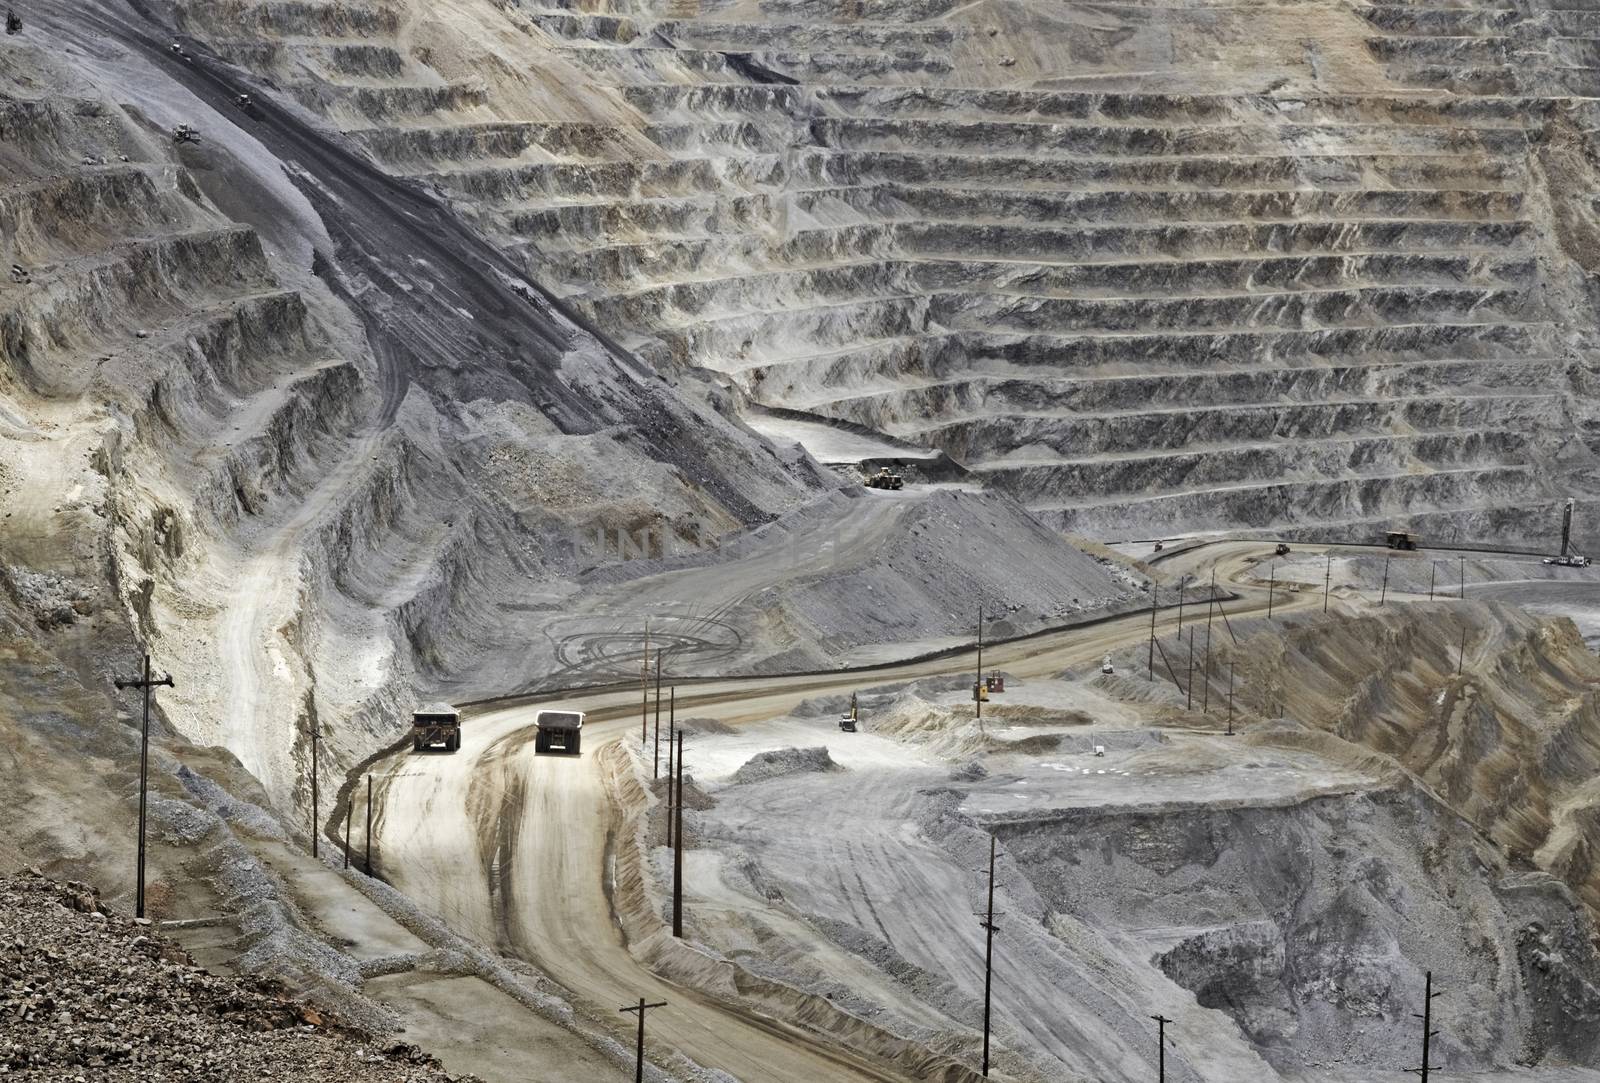 Kennecott, copper, gold and silver mine operation outside Salt L by Tjeerdkruse